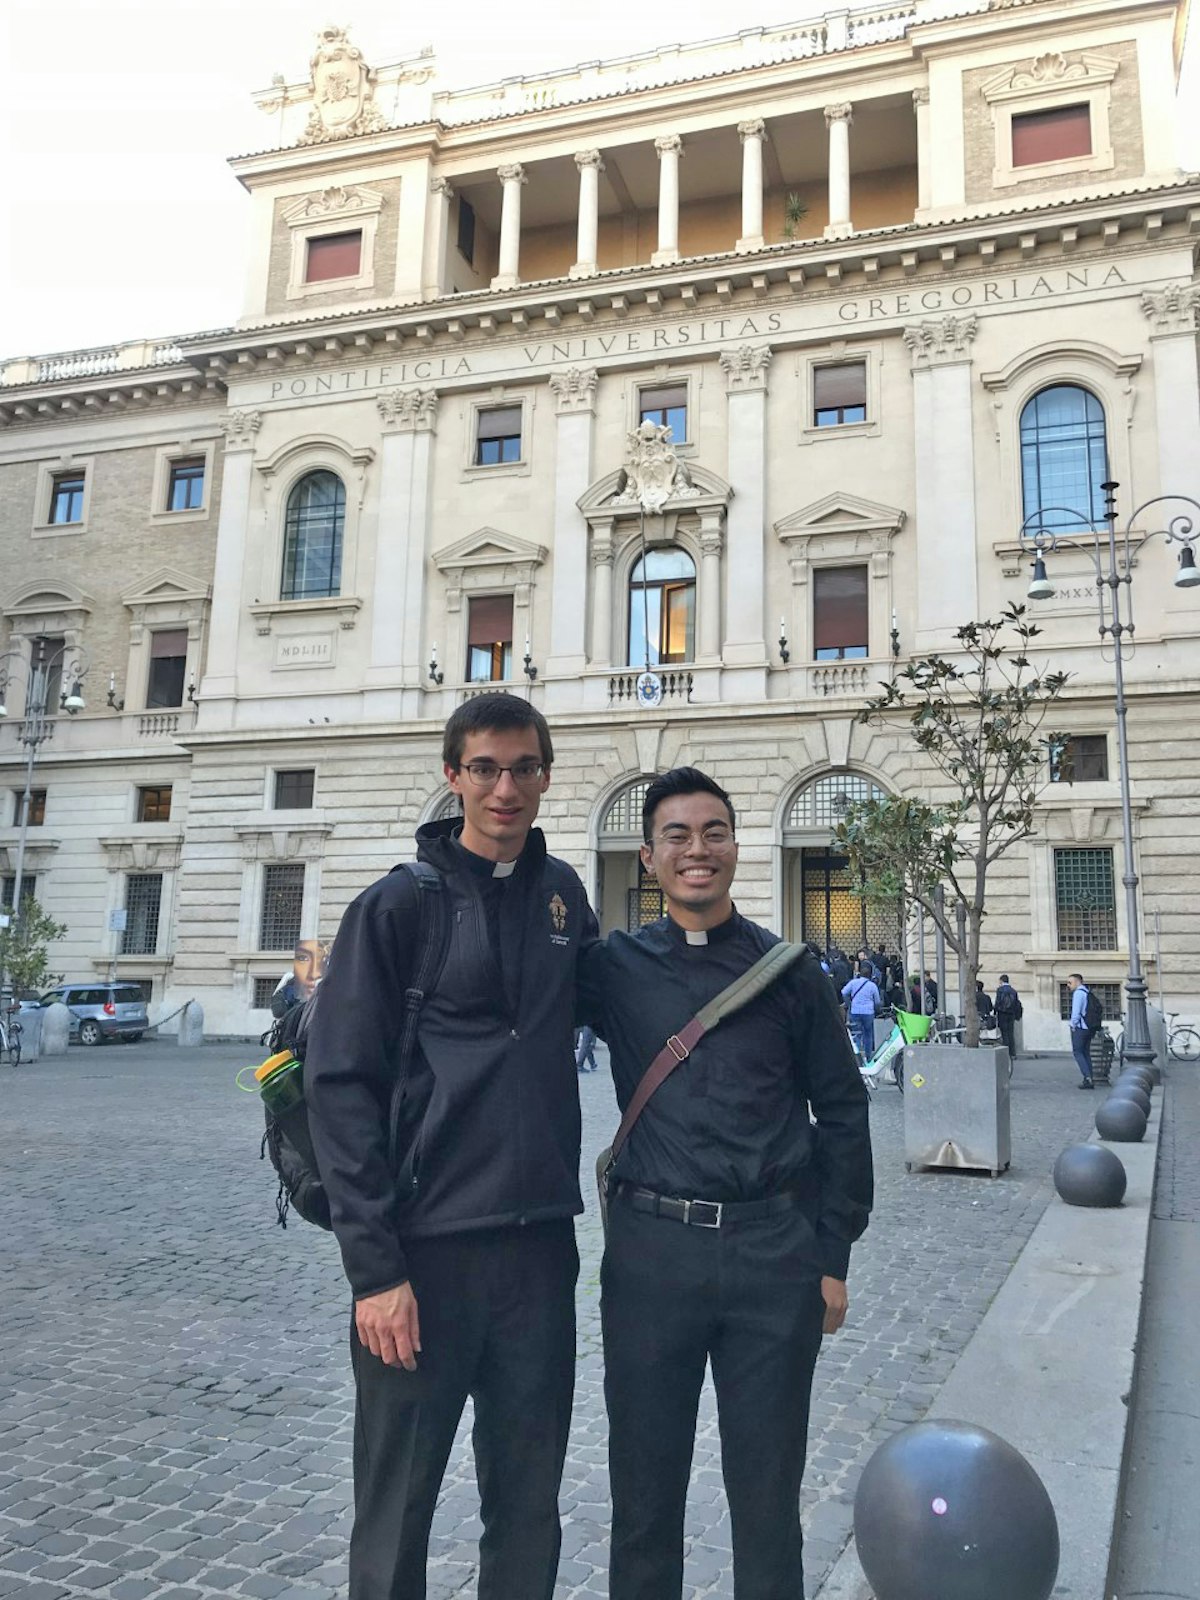 Ryan Asher, left, a seminarian studying for the priesthood for the Archdiocese of Detroit, stands with classmate Joshua Burcroff, also studying for the Archdiocese of Detroit, outside the Pontifical Gregorian University in Rome, where seminarians attending the Pontifical North American College attend classes with seminarians and professors from around the world.